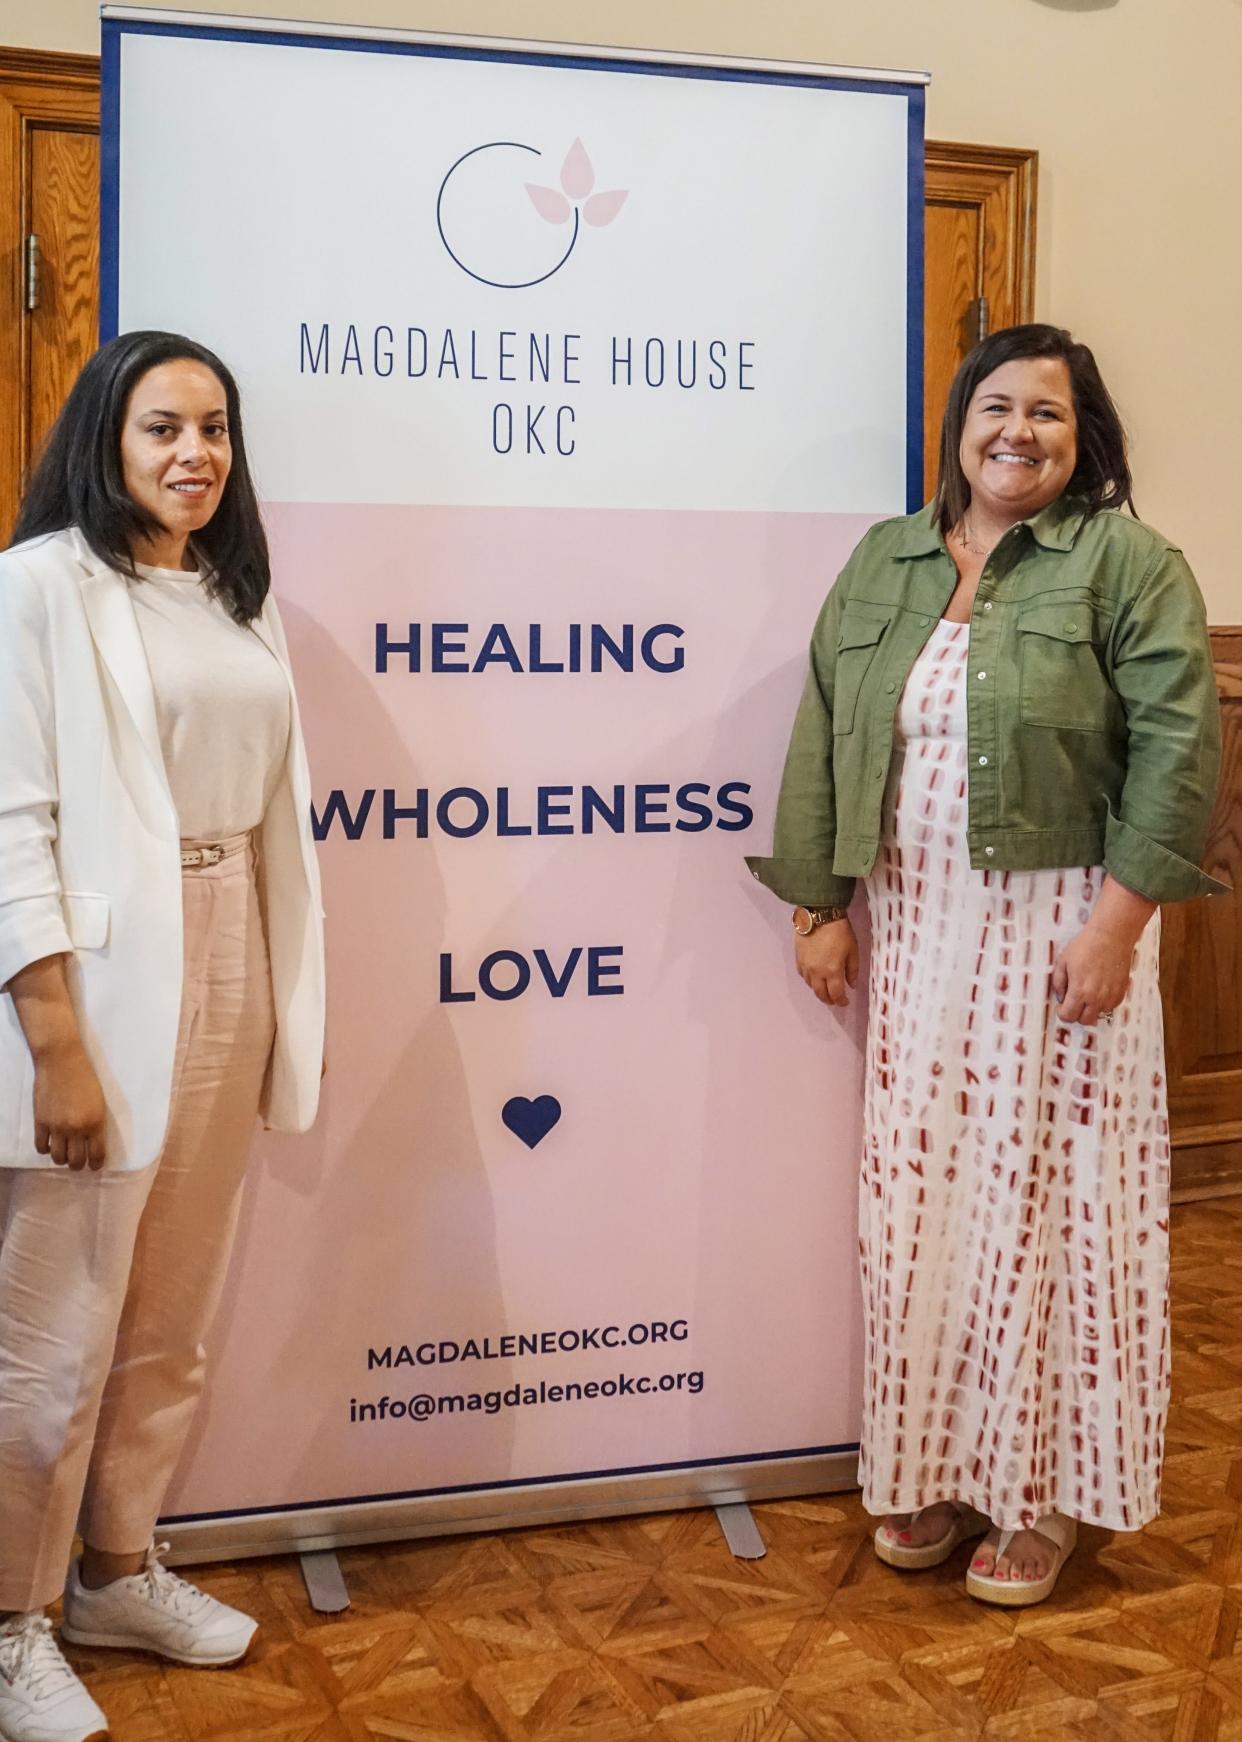 Magdalene House OKC staff members Lakitia Bates, program director, and Shannon Hartsock, executive director, pose for a photo at a luncheon at All Souls' Episcopal Church.